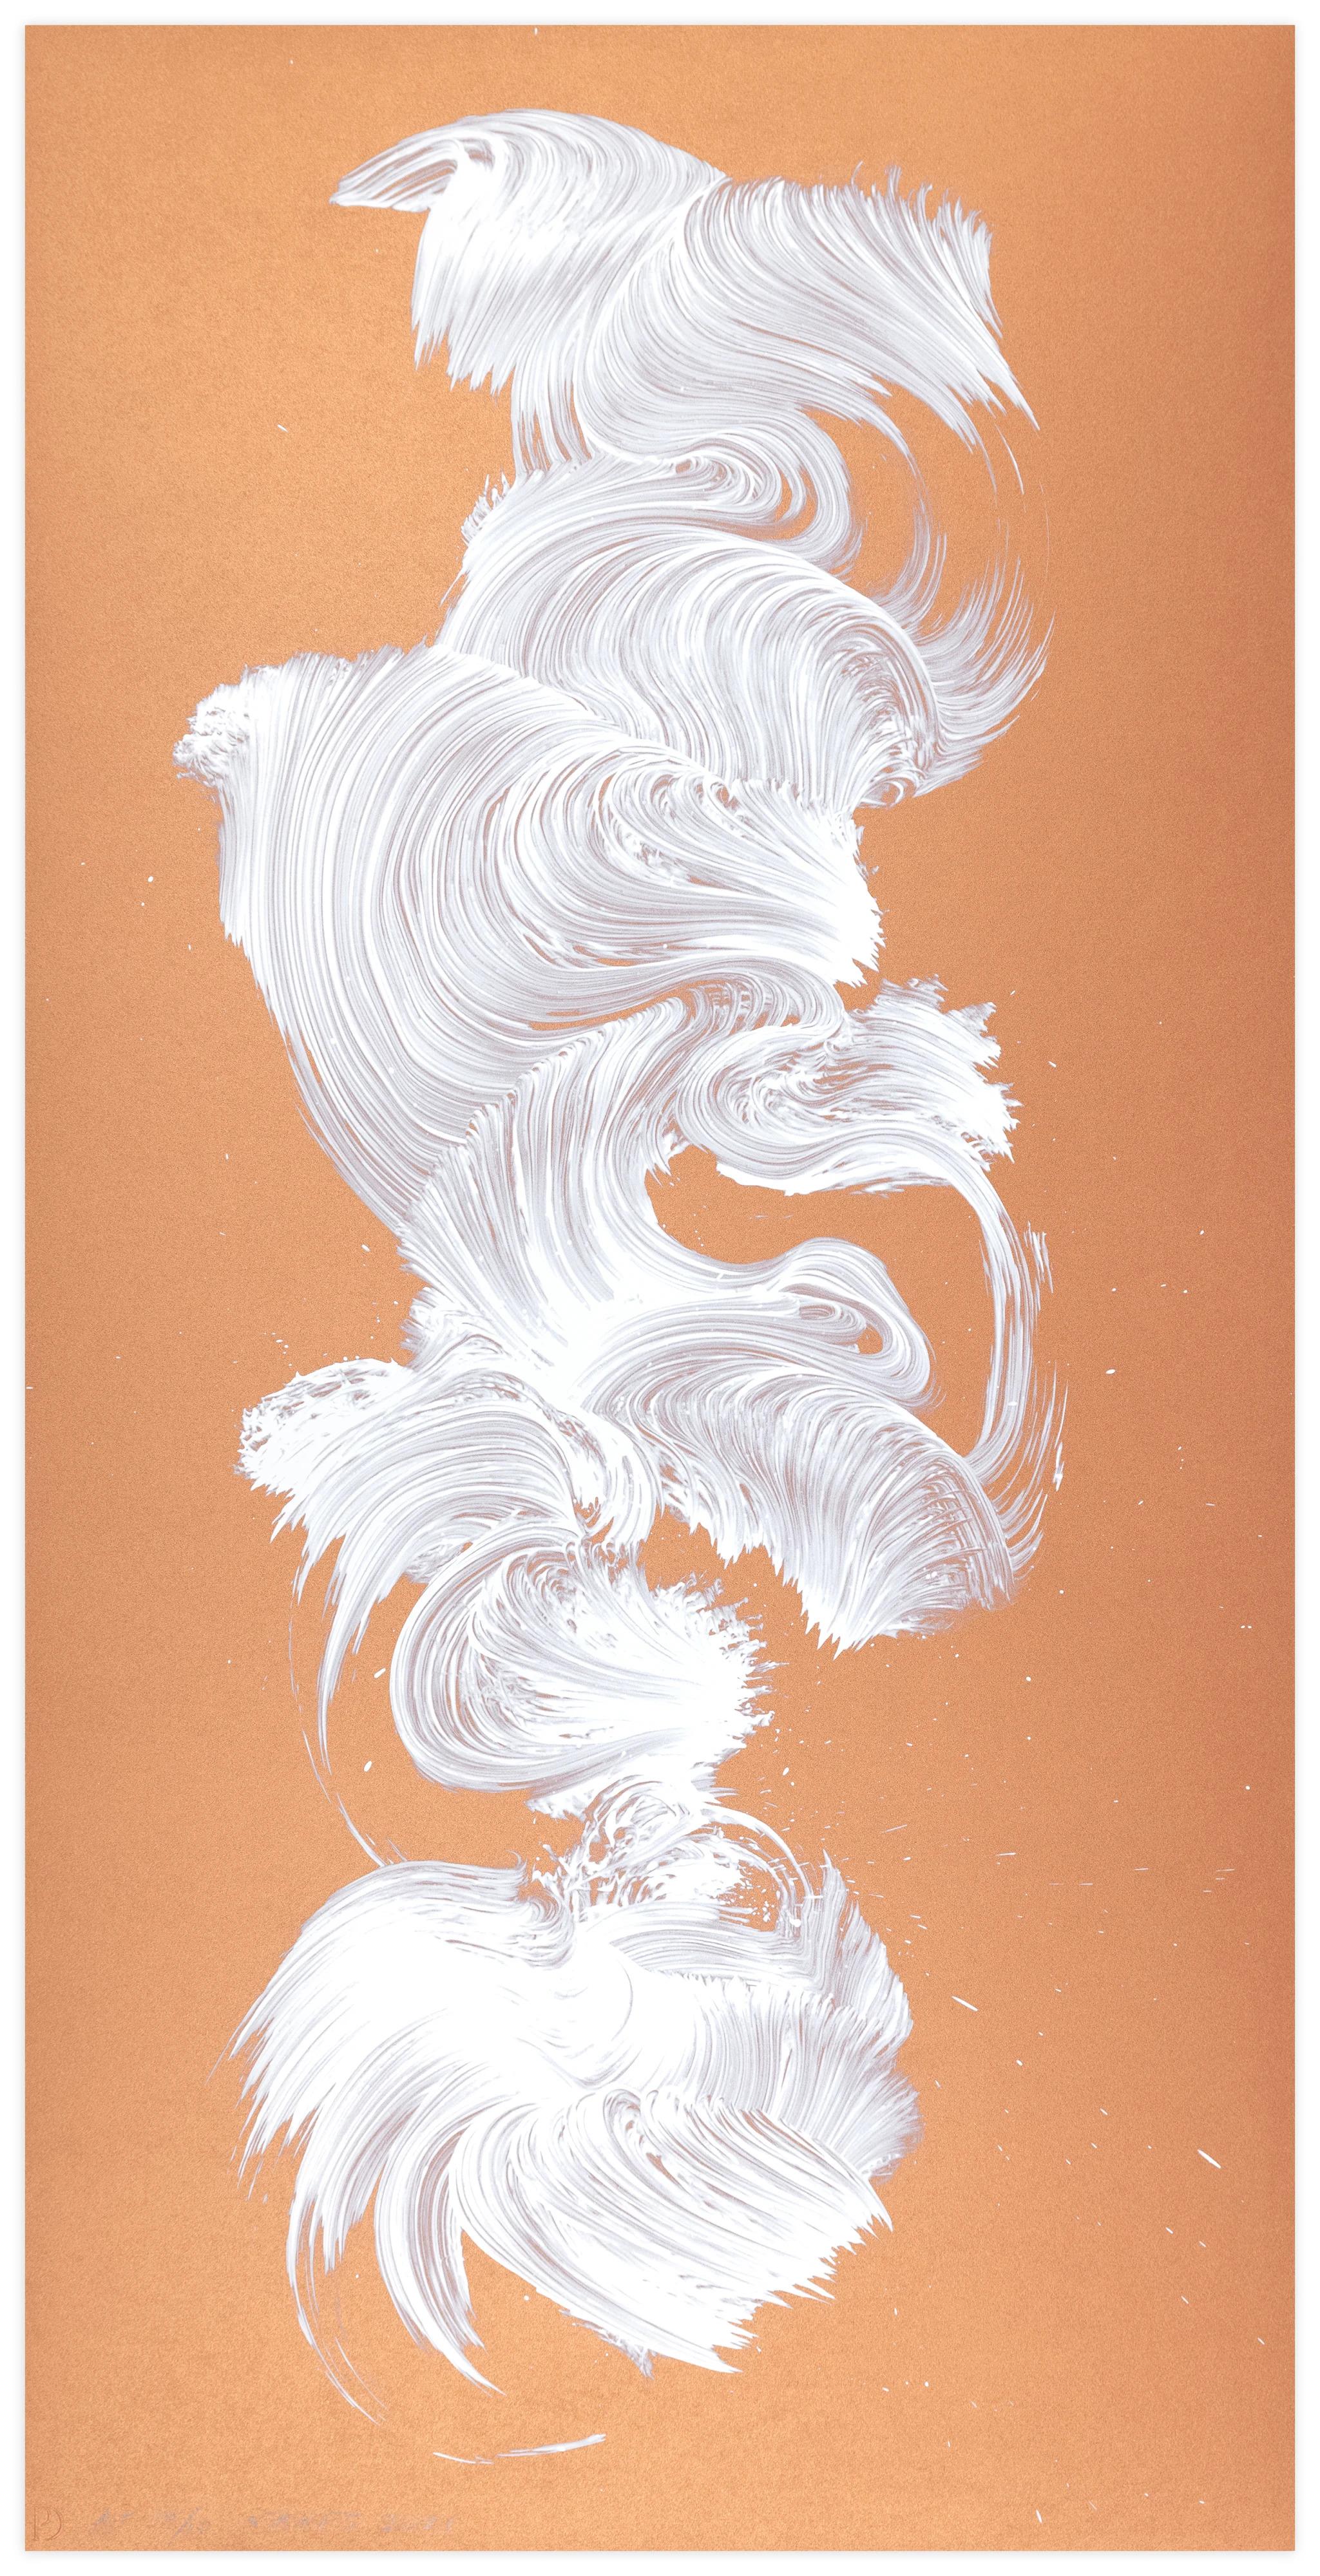 James Nares Abstract Print - Particle and Wave 2